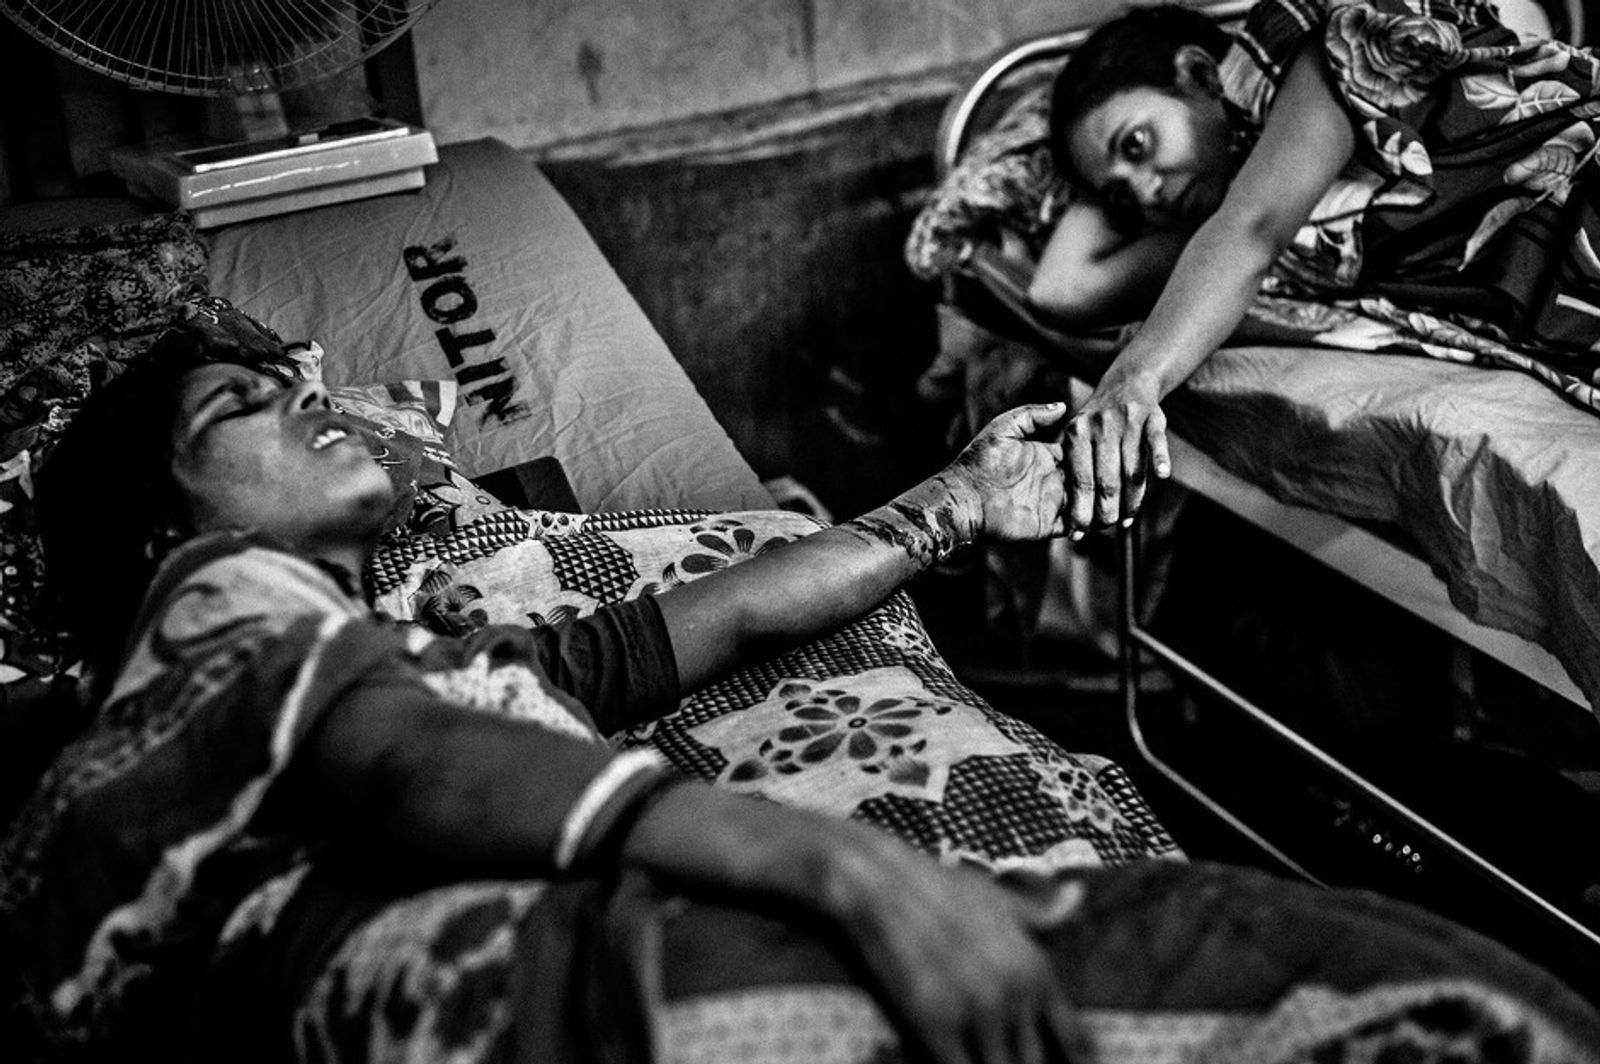 © Rahul Talukder - Two seriously injured victims comfort each other at the orthopedics and rehabilitation institute in Dhaka, Bangladesh.